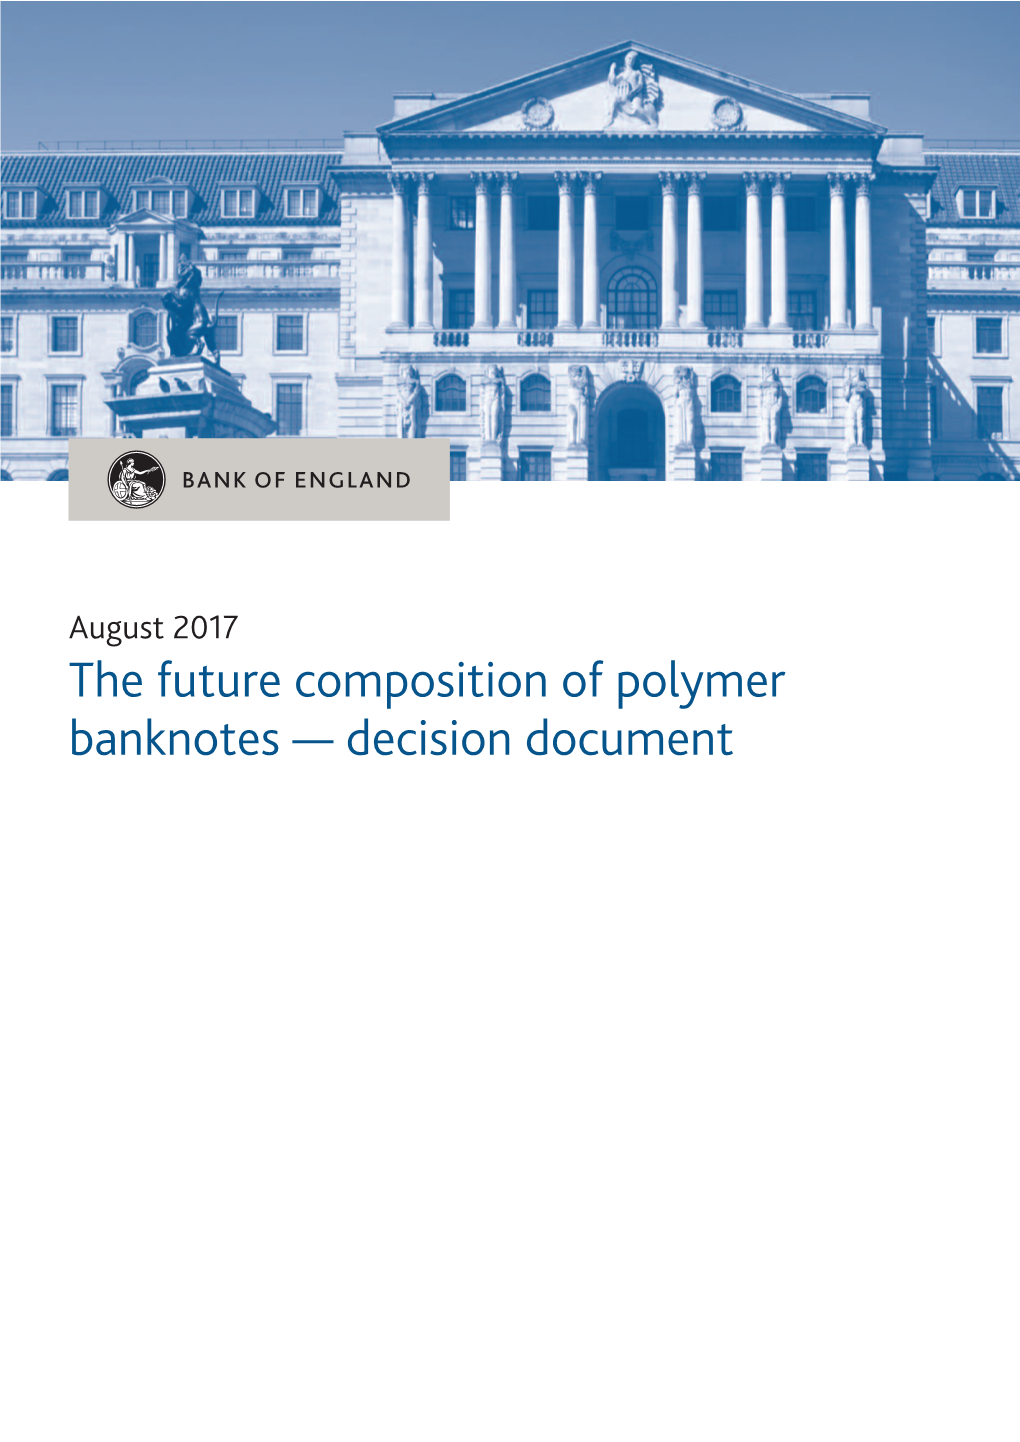 The Future Composition of Polymer Banknotes — Decision Document